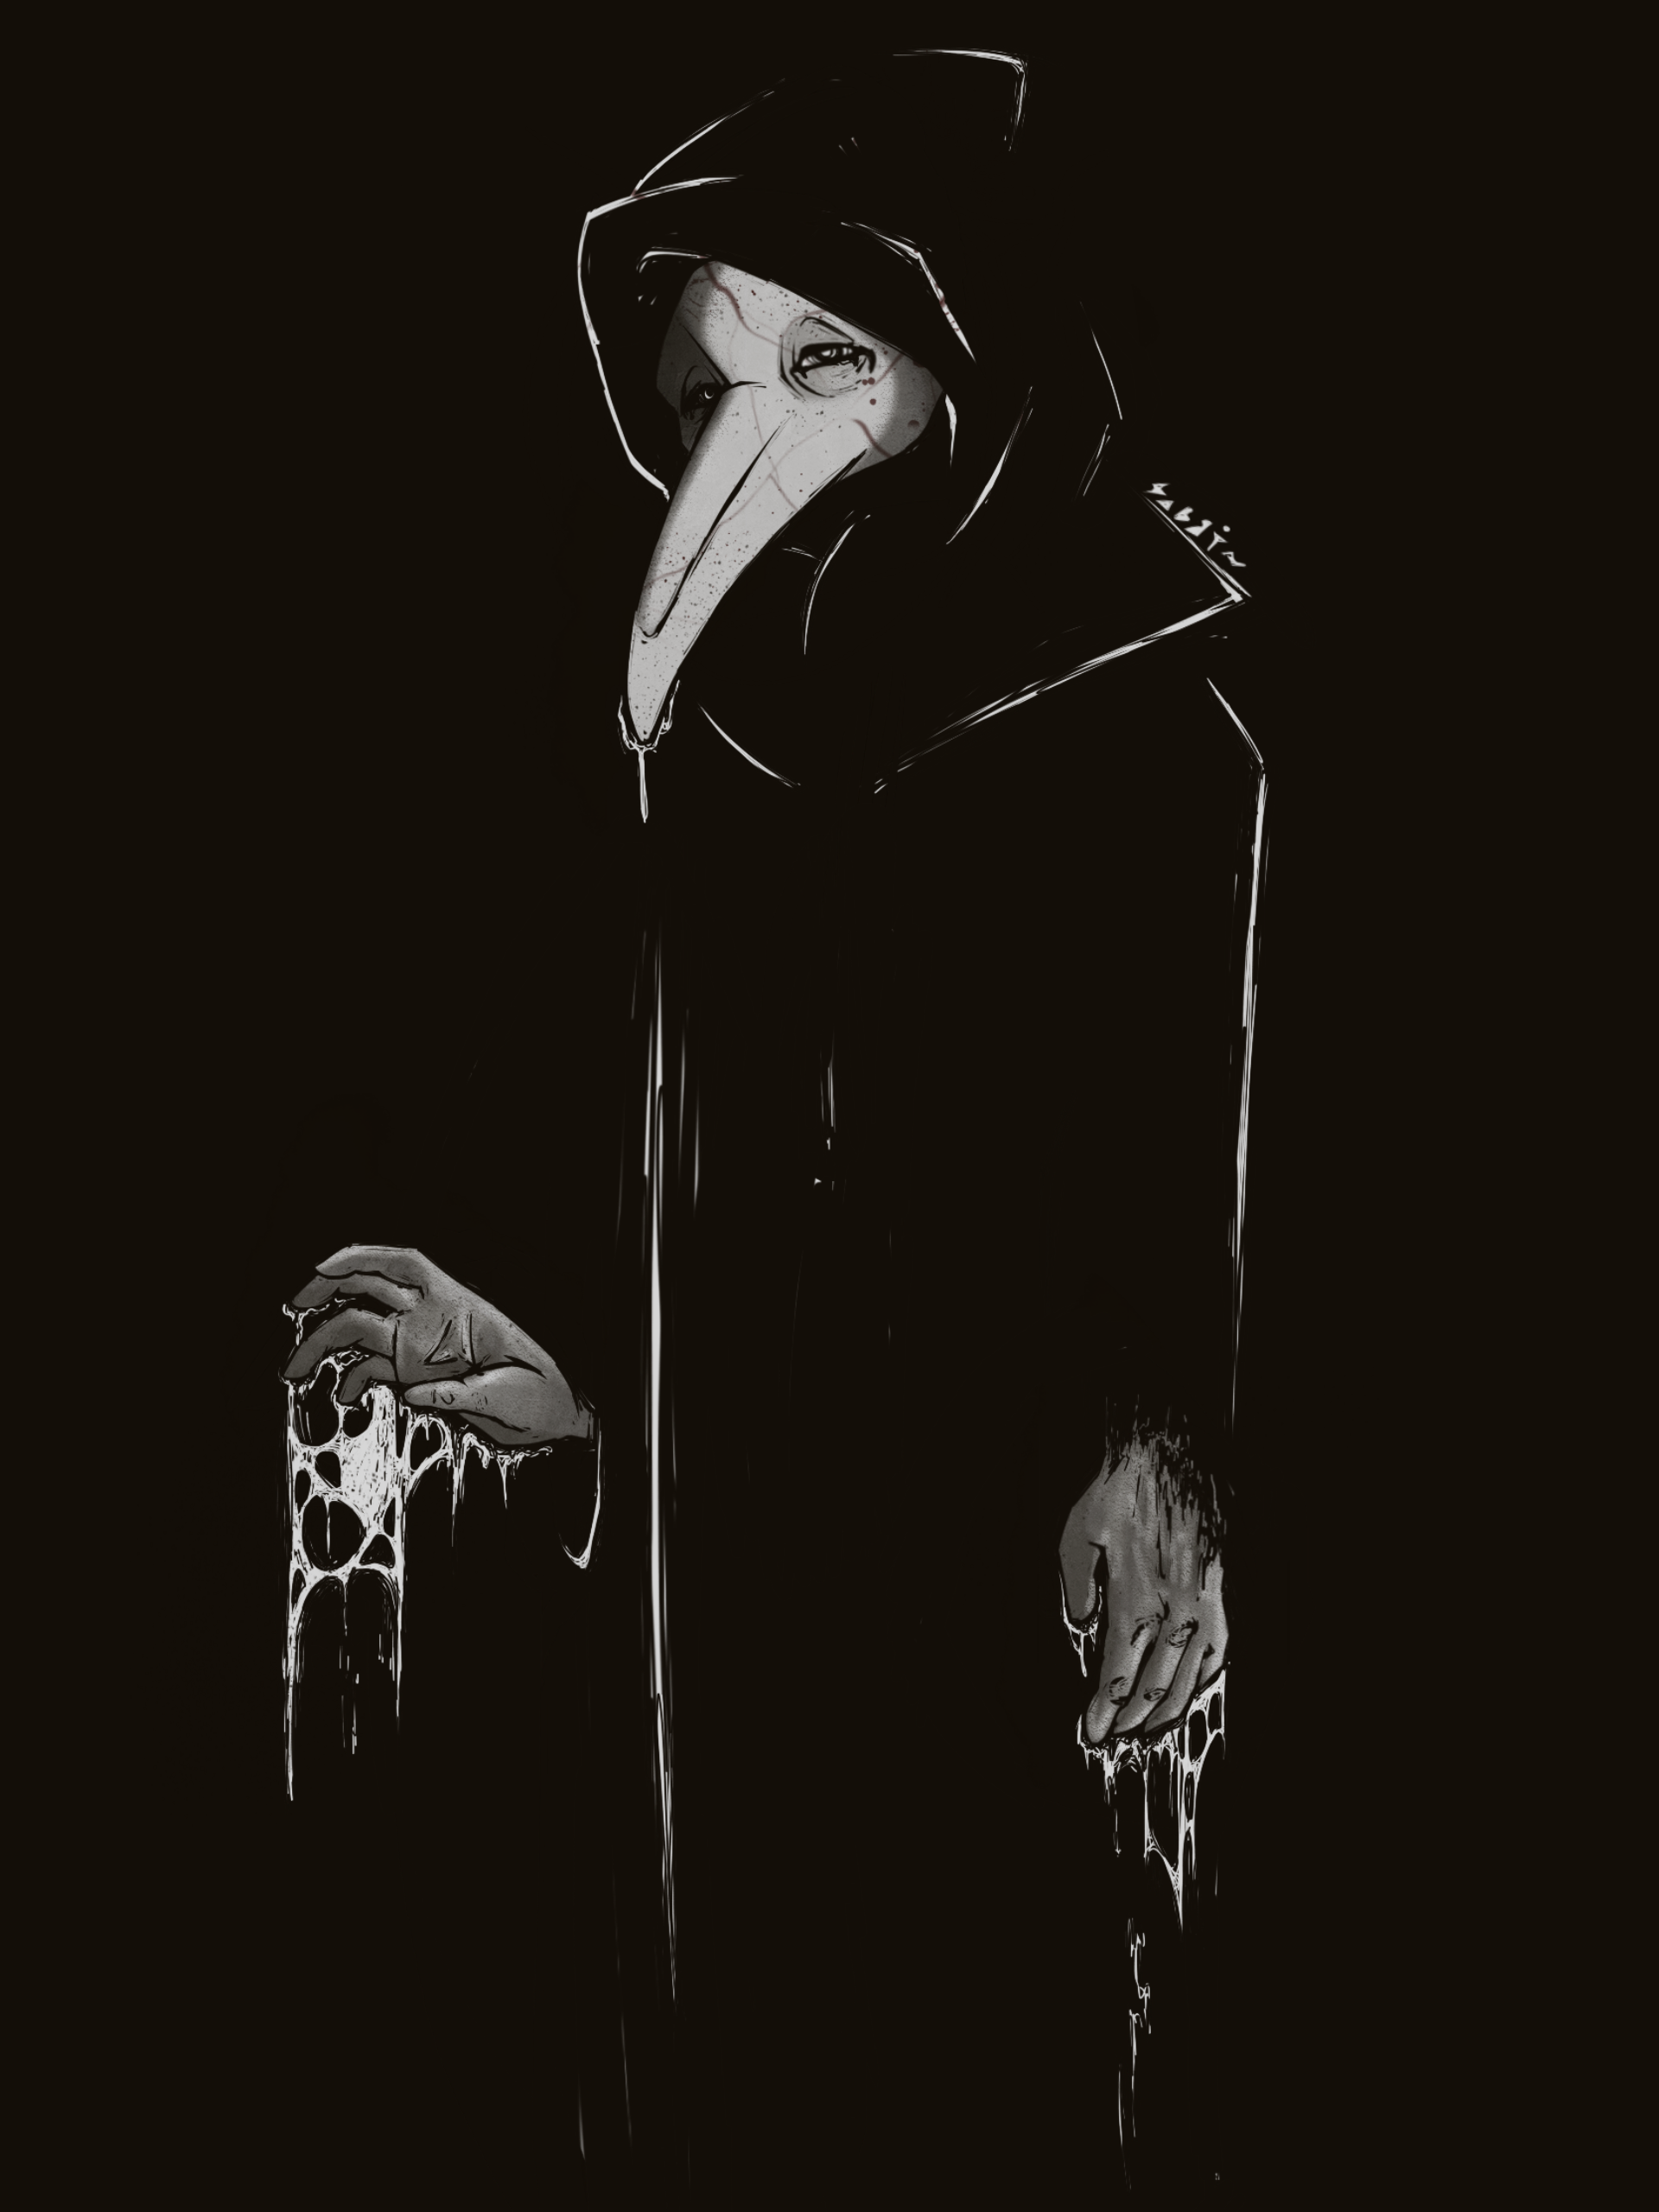 SCP-049 art, now with extra sorrow : r/SCP